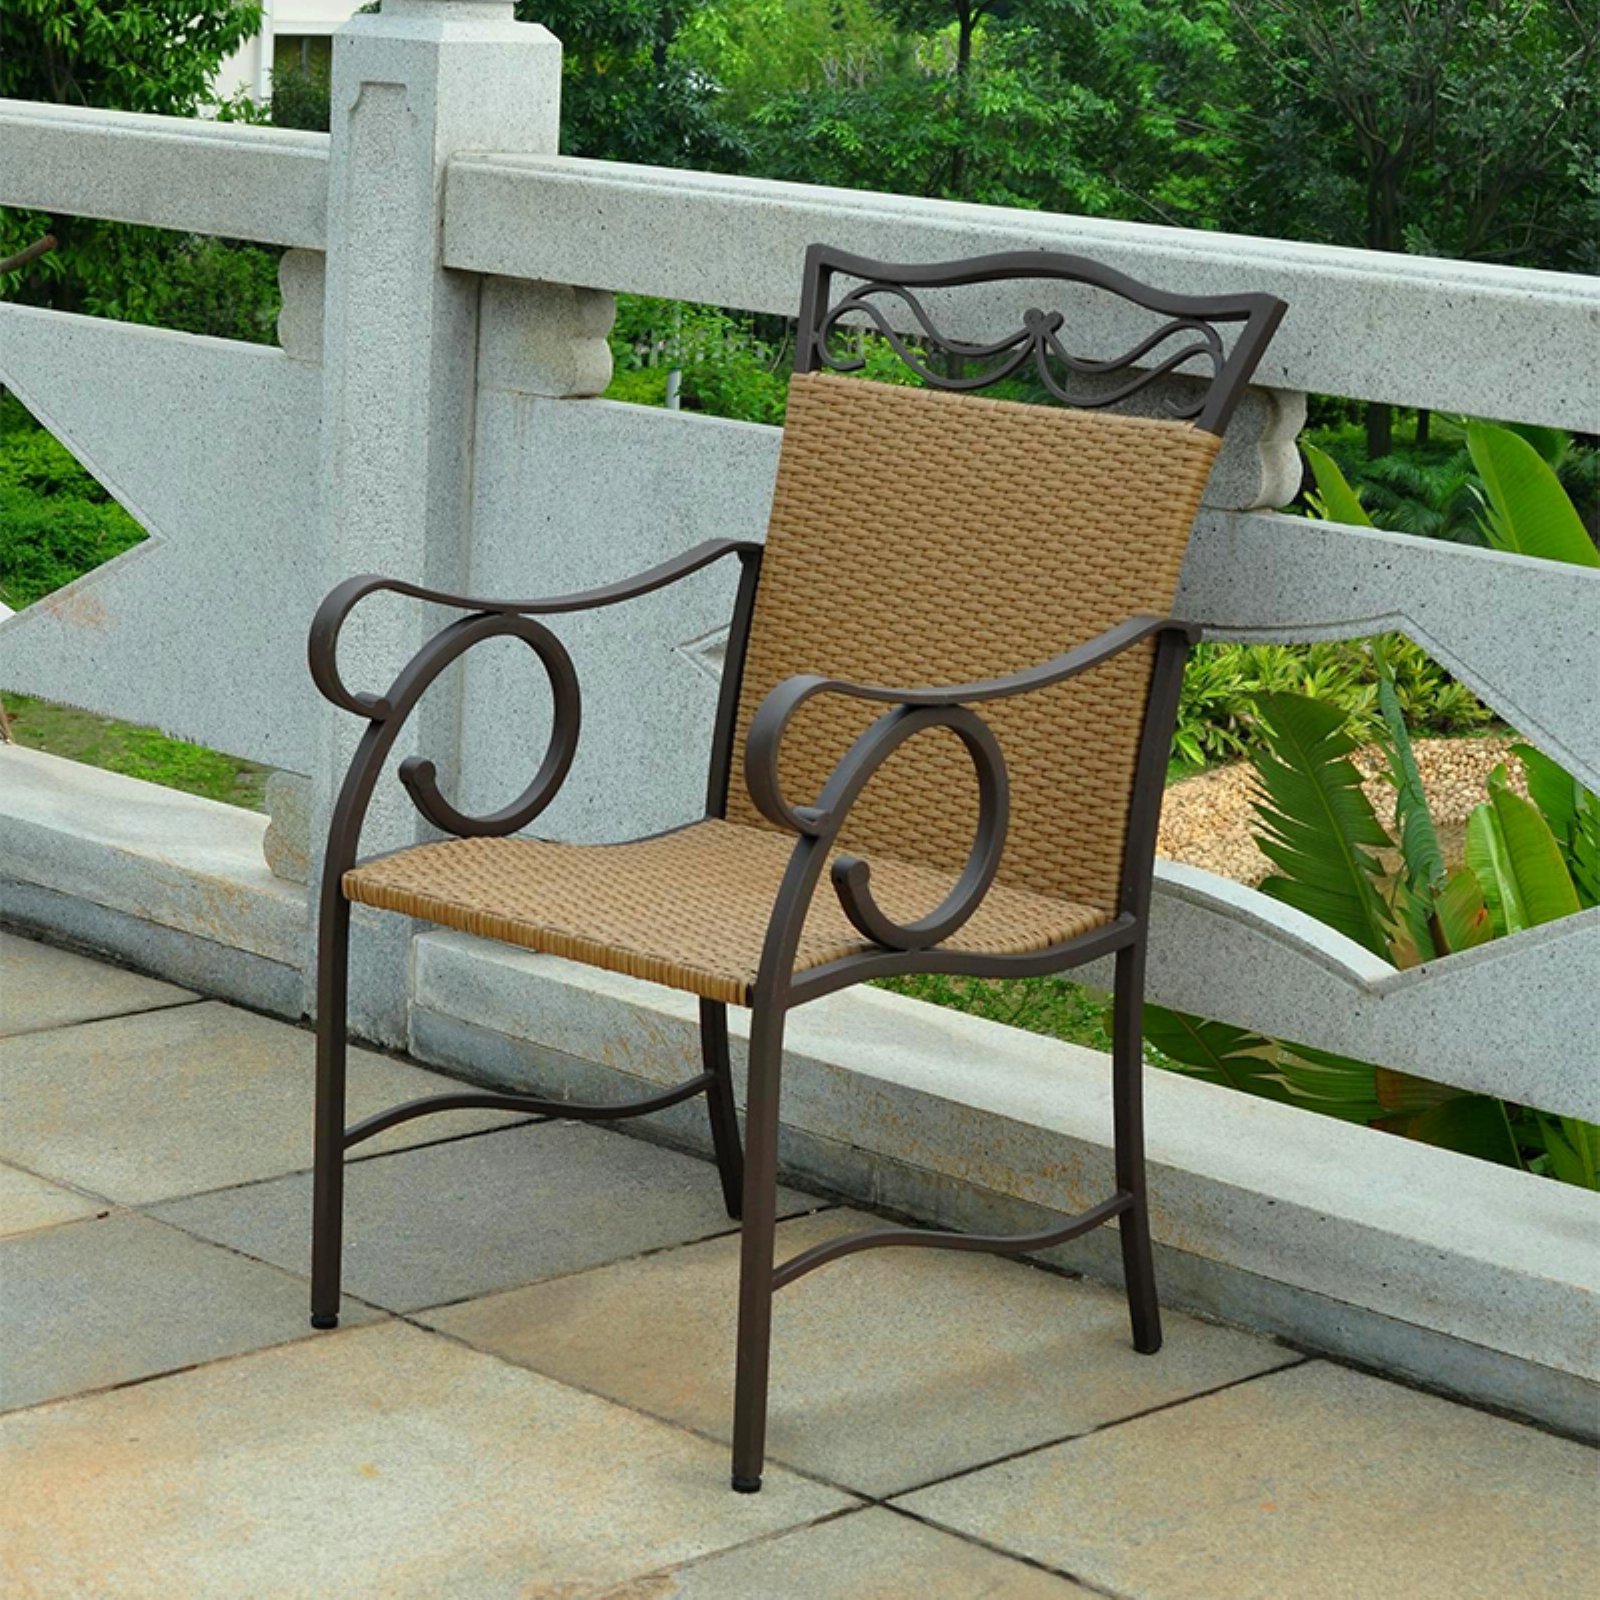 International Caravan Valencia All-Weather Wicker Patio Dining Chair - Set of 2 - image 1 of 2